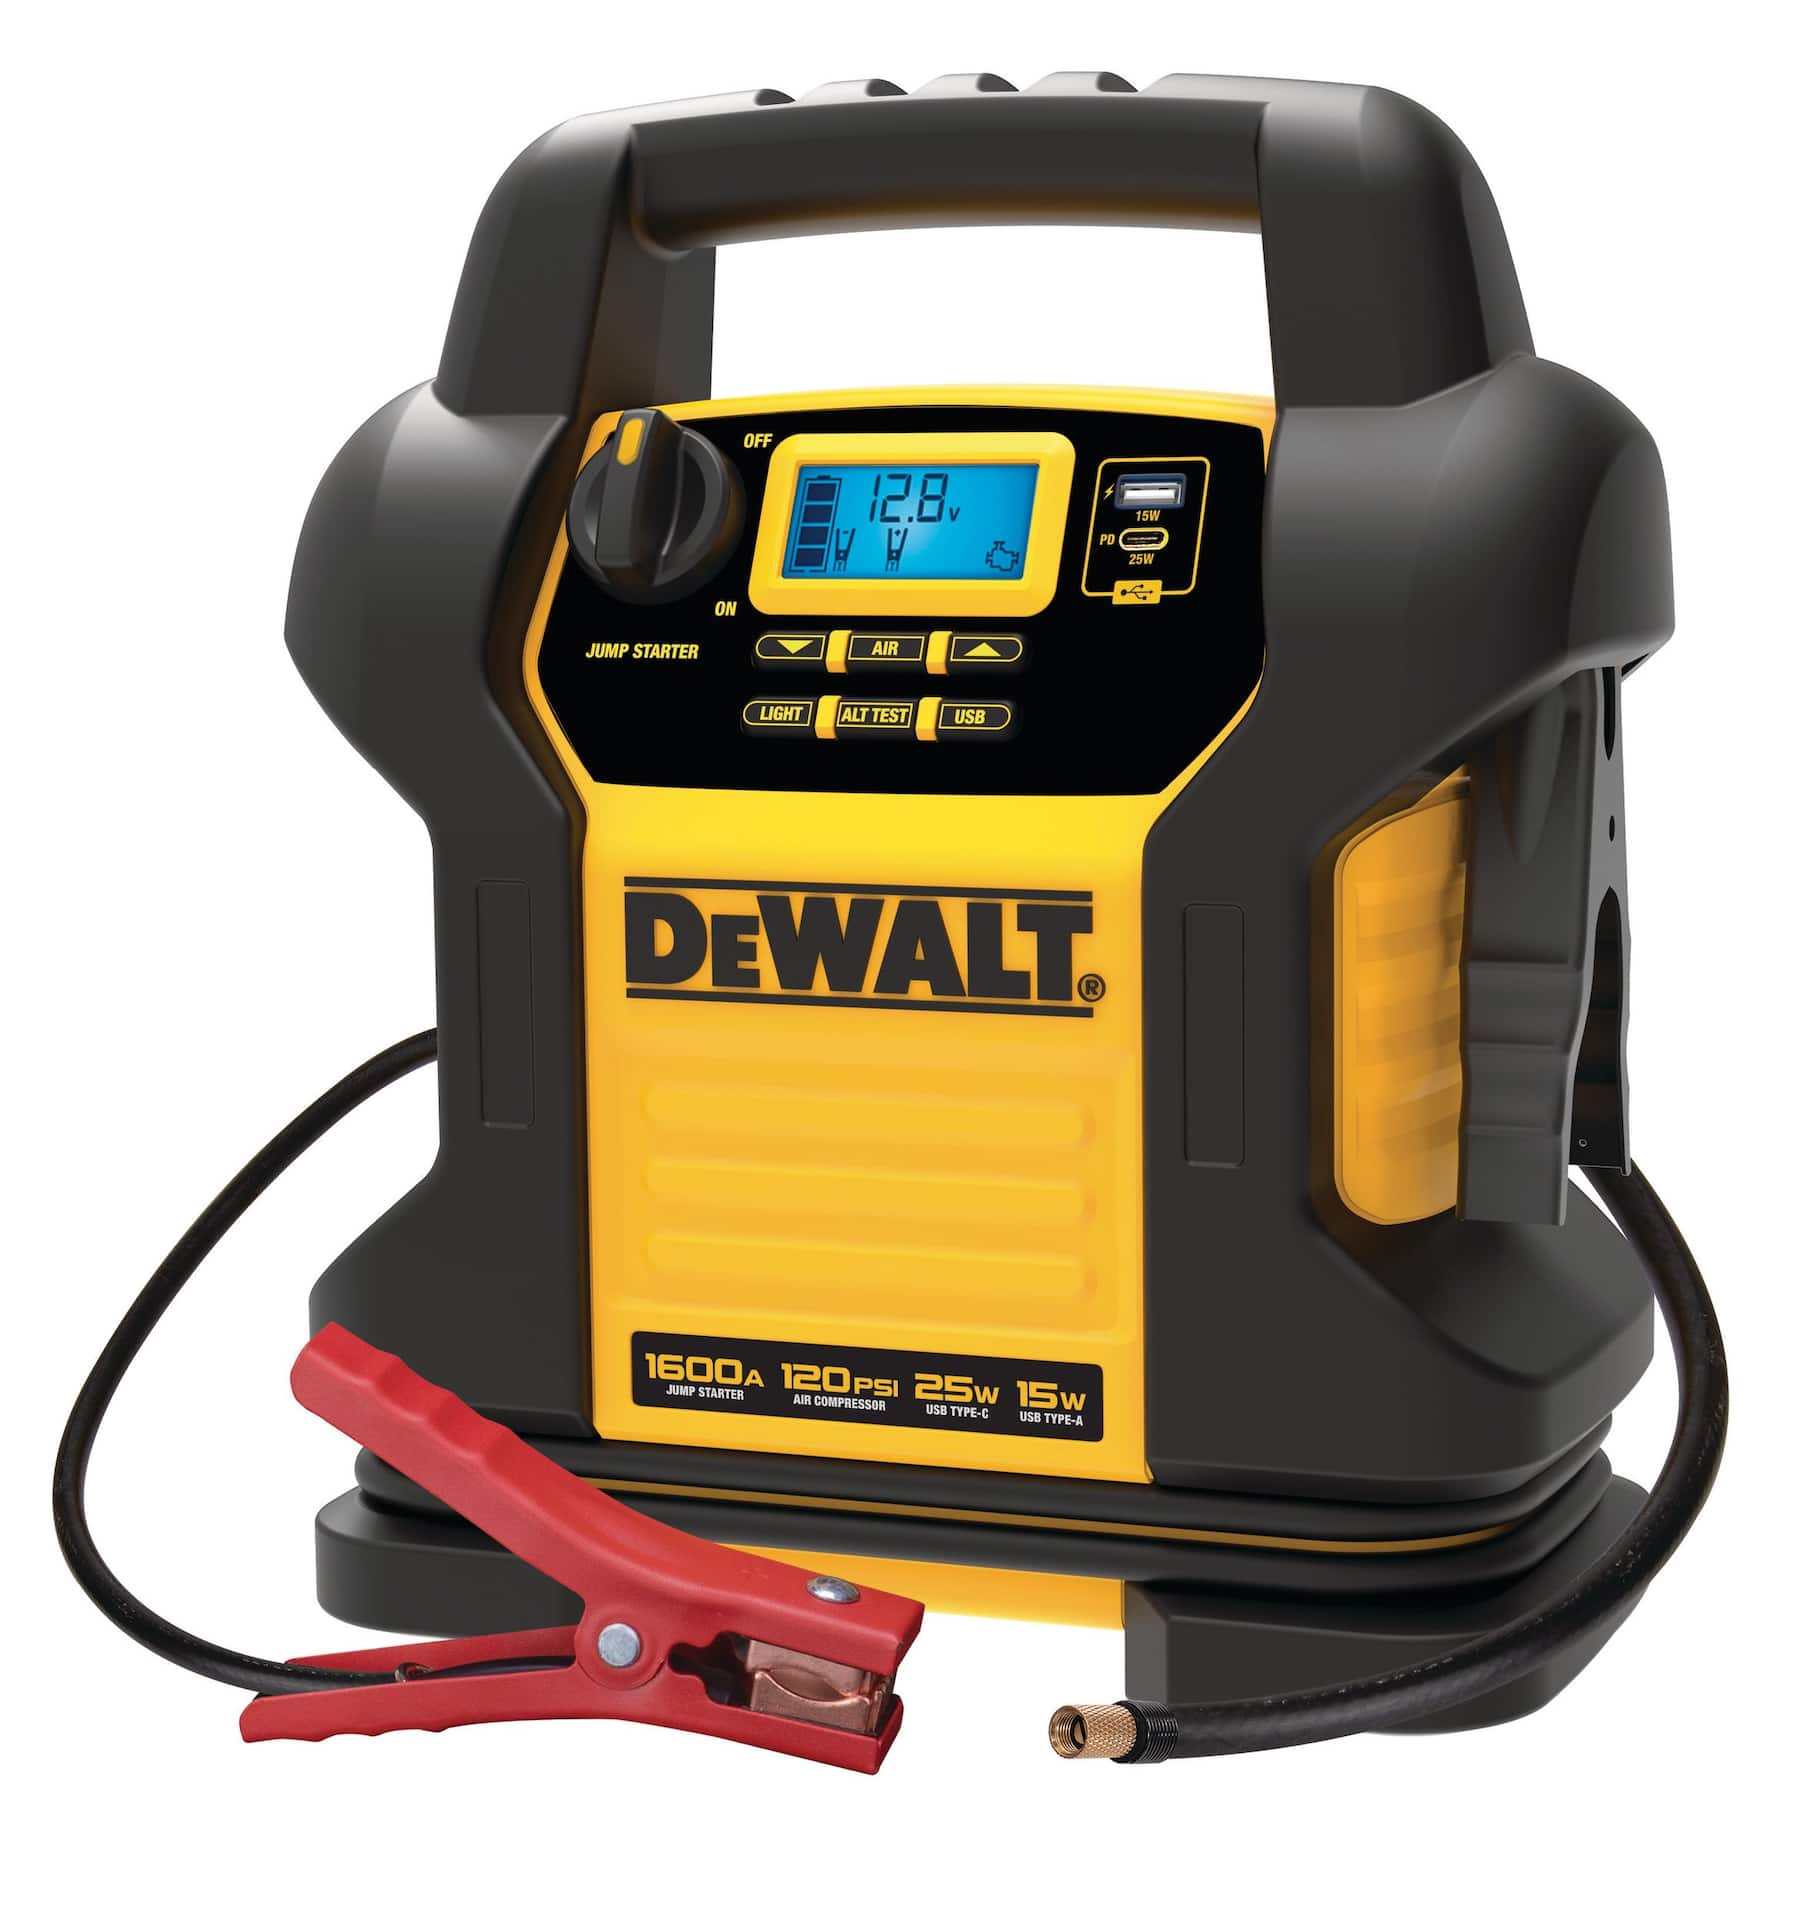 https://media-www.canadiantire.ca/product/automotive/light-auto-parts/auto-battery-accessories/0112059/dewalt-1600a-lead-acid-booster-pack-735f0981-6a45-4890-8dab-cd54a2c40ff7-jpgrendition.jpg